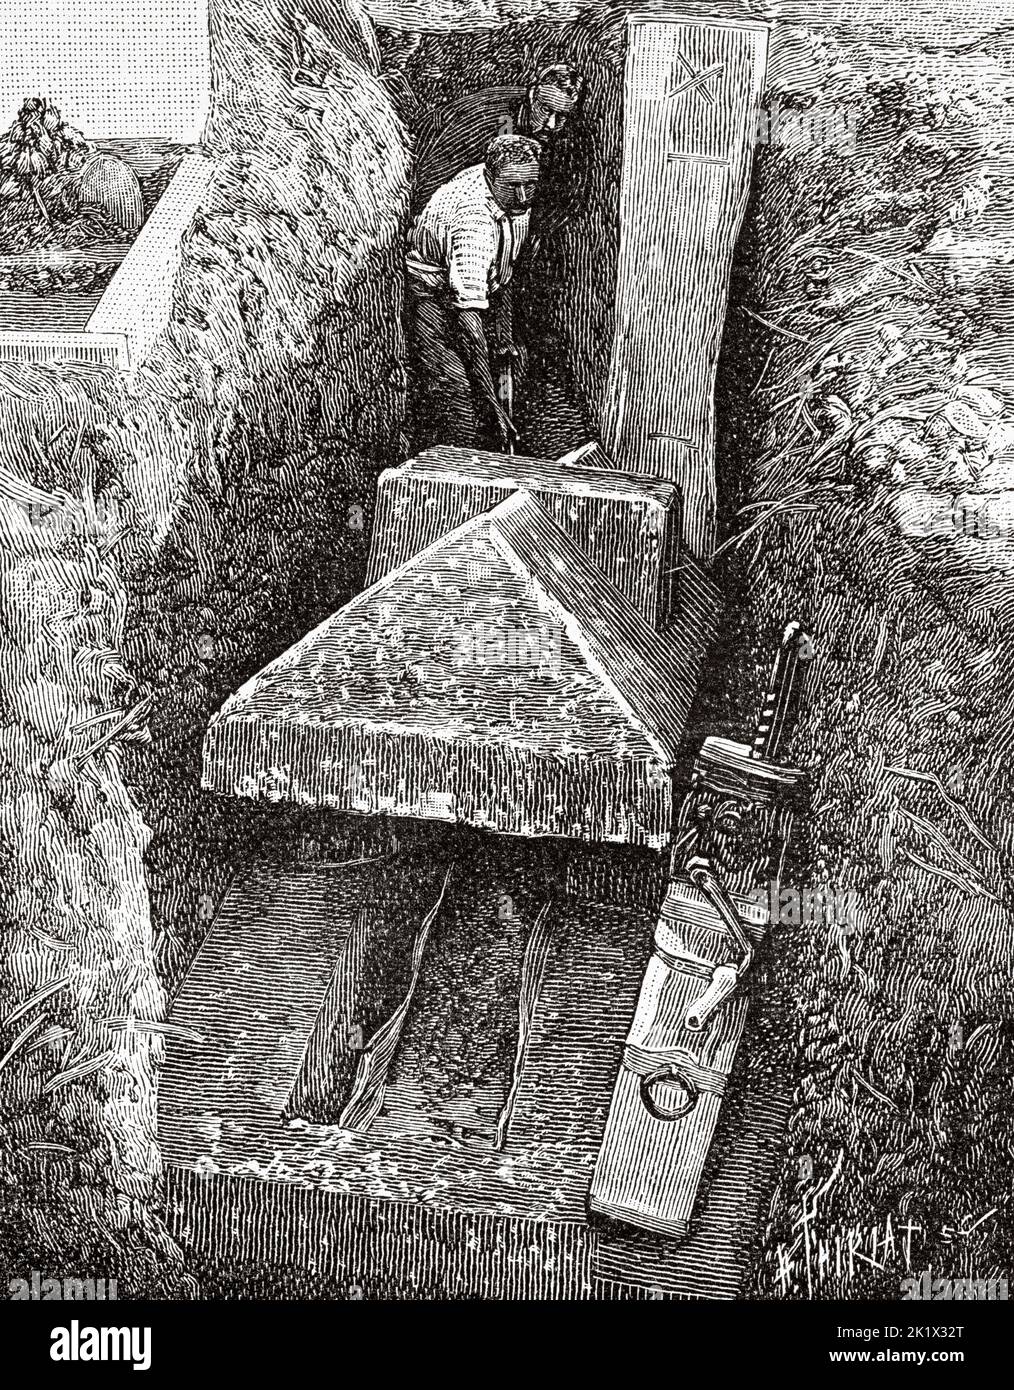 Gallo-Roman burial discovered in the cemetery of Beauvais, France. Old 19th century engraved illustration from La Nature 1890 Stock Photo